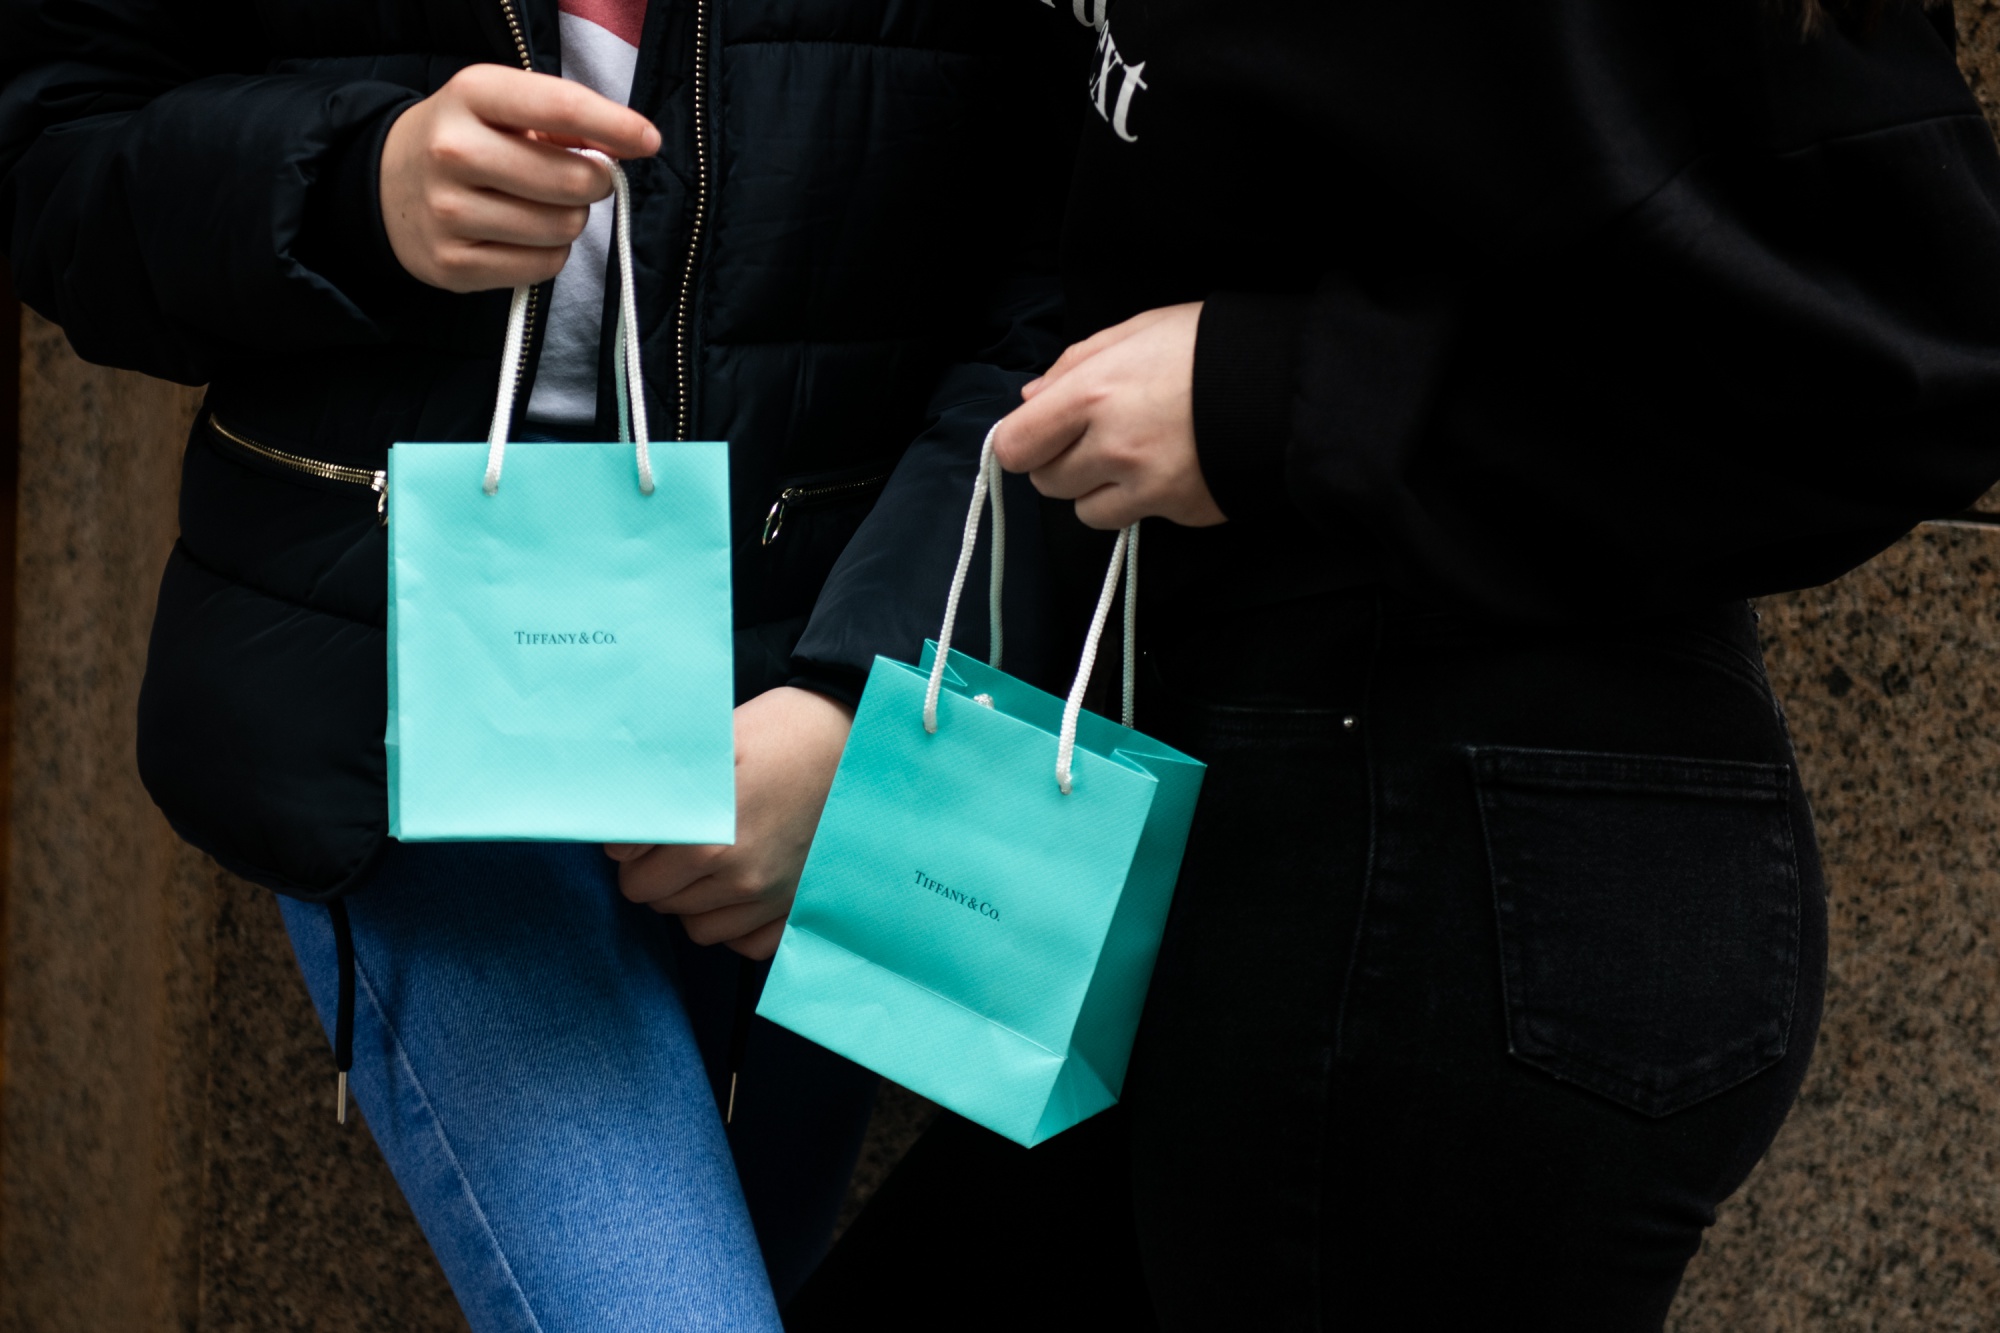 Tiffany & Co. rises on report it called for sweetened bid from